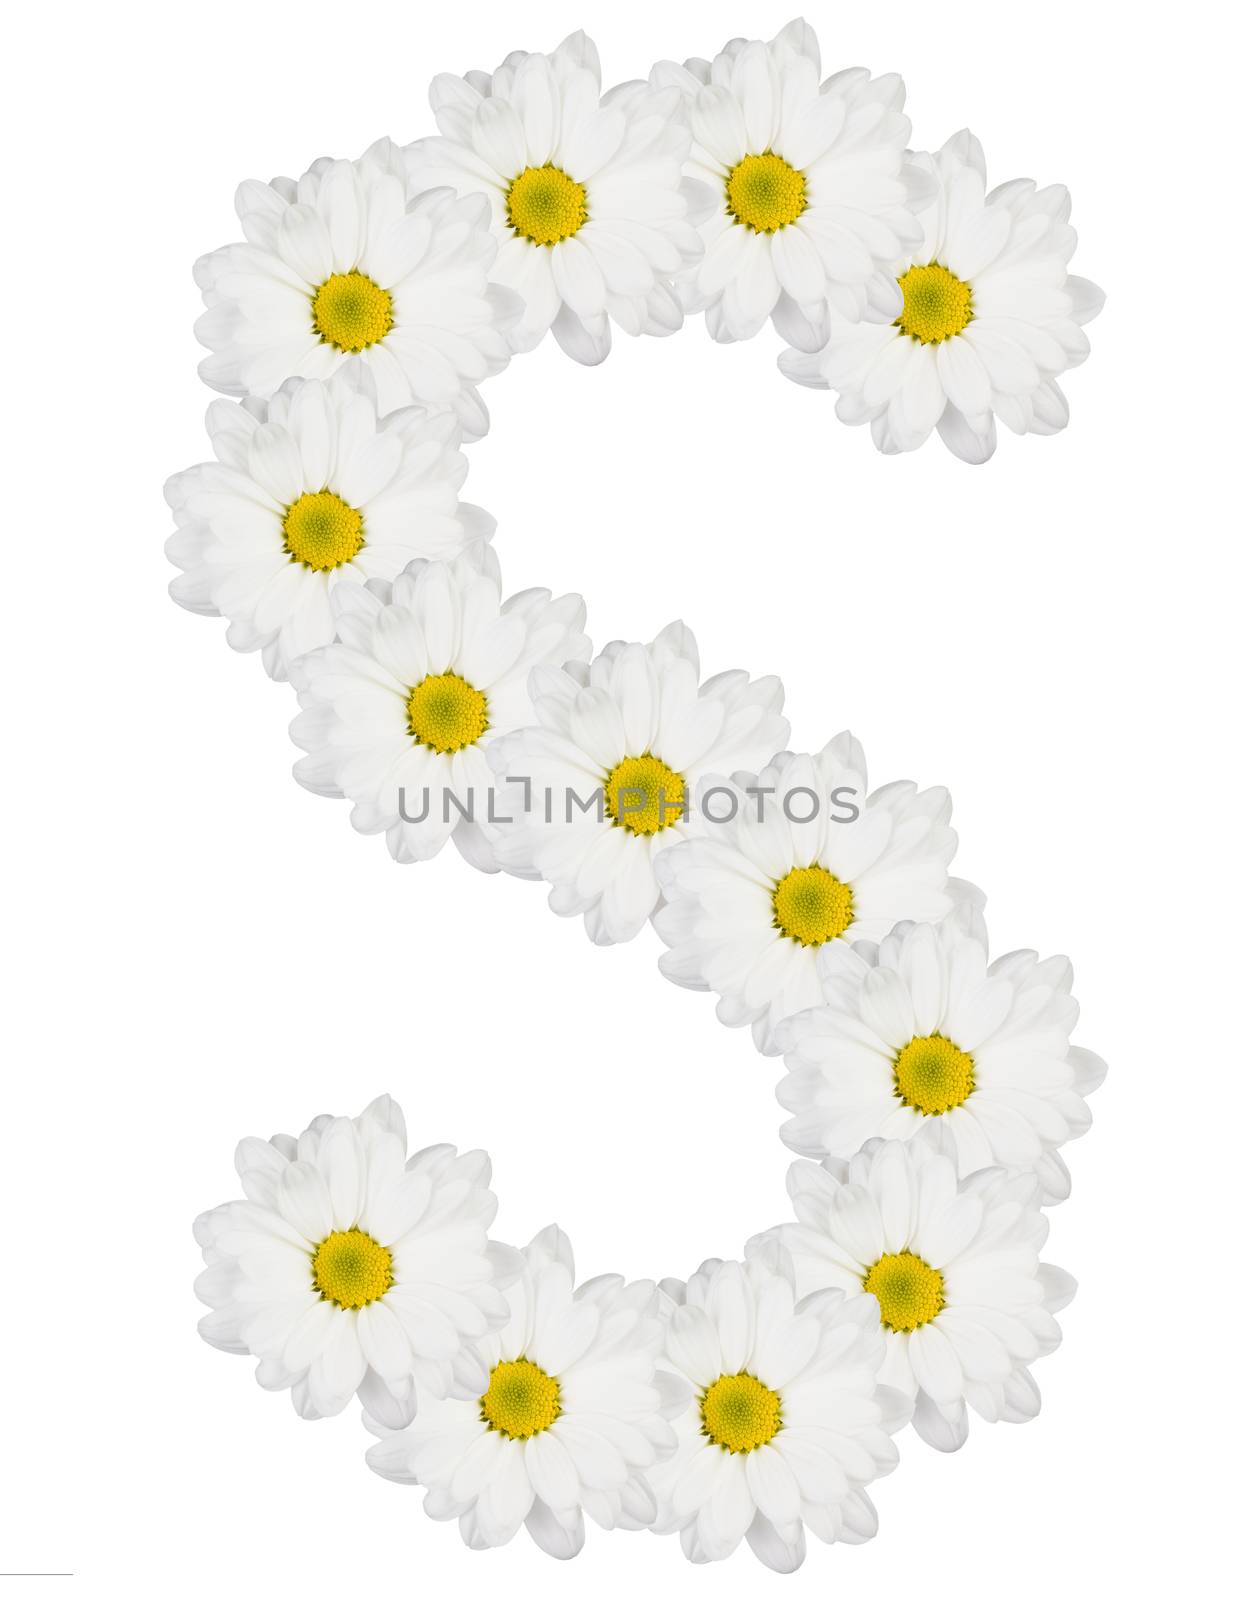 Letter S made from white flowers